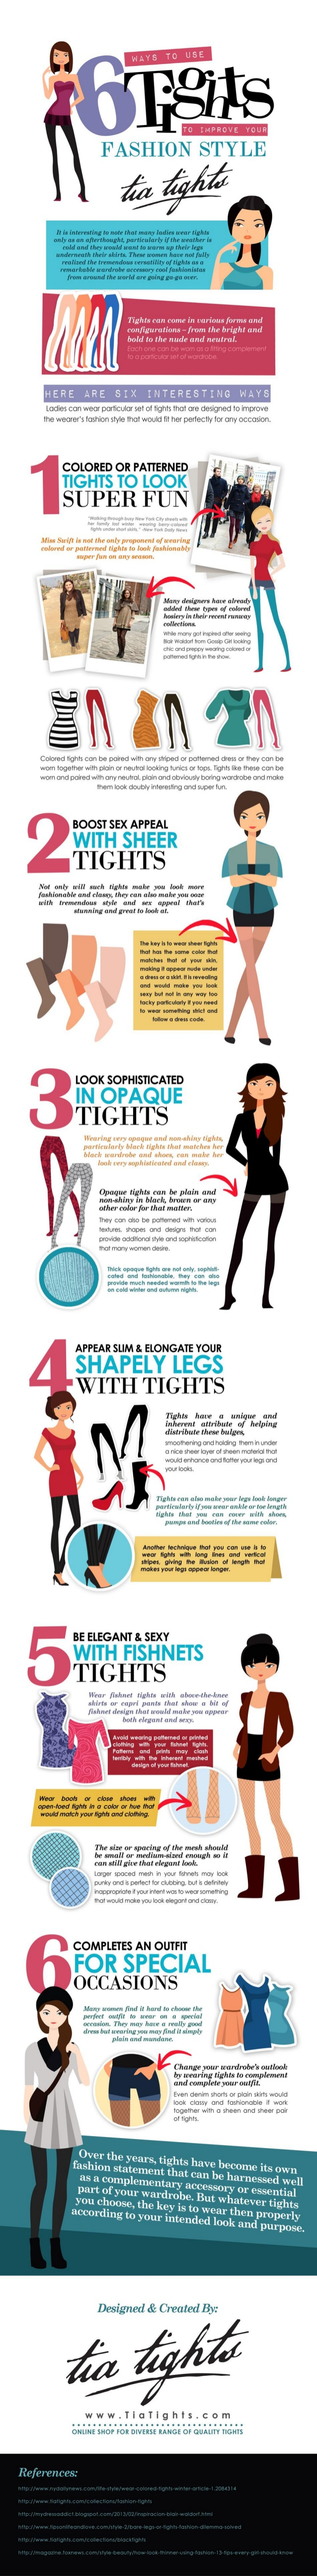 6 Ways to Use Tights to Improve Your Fashion Style